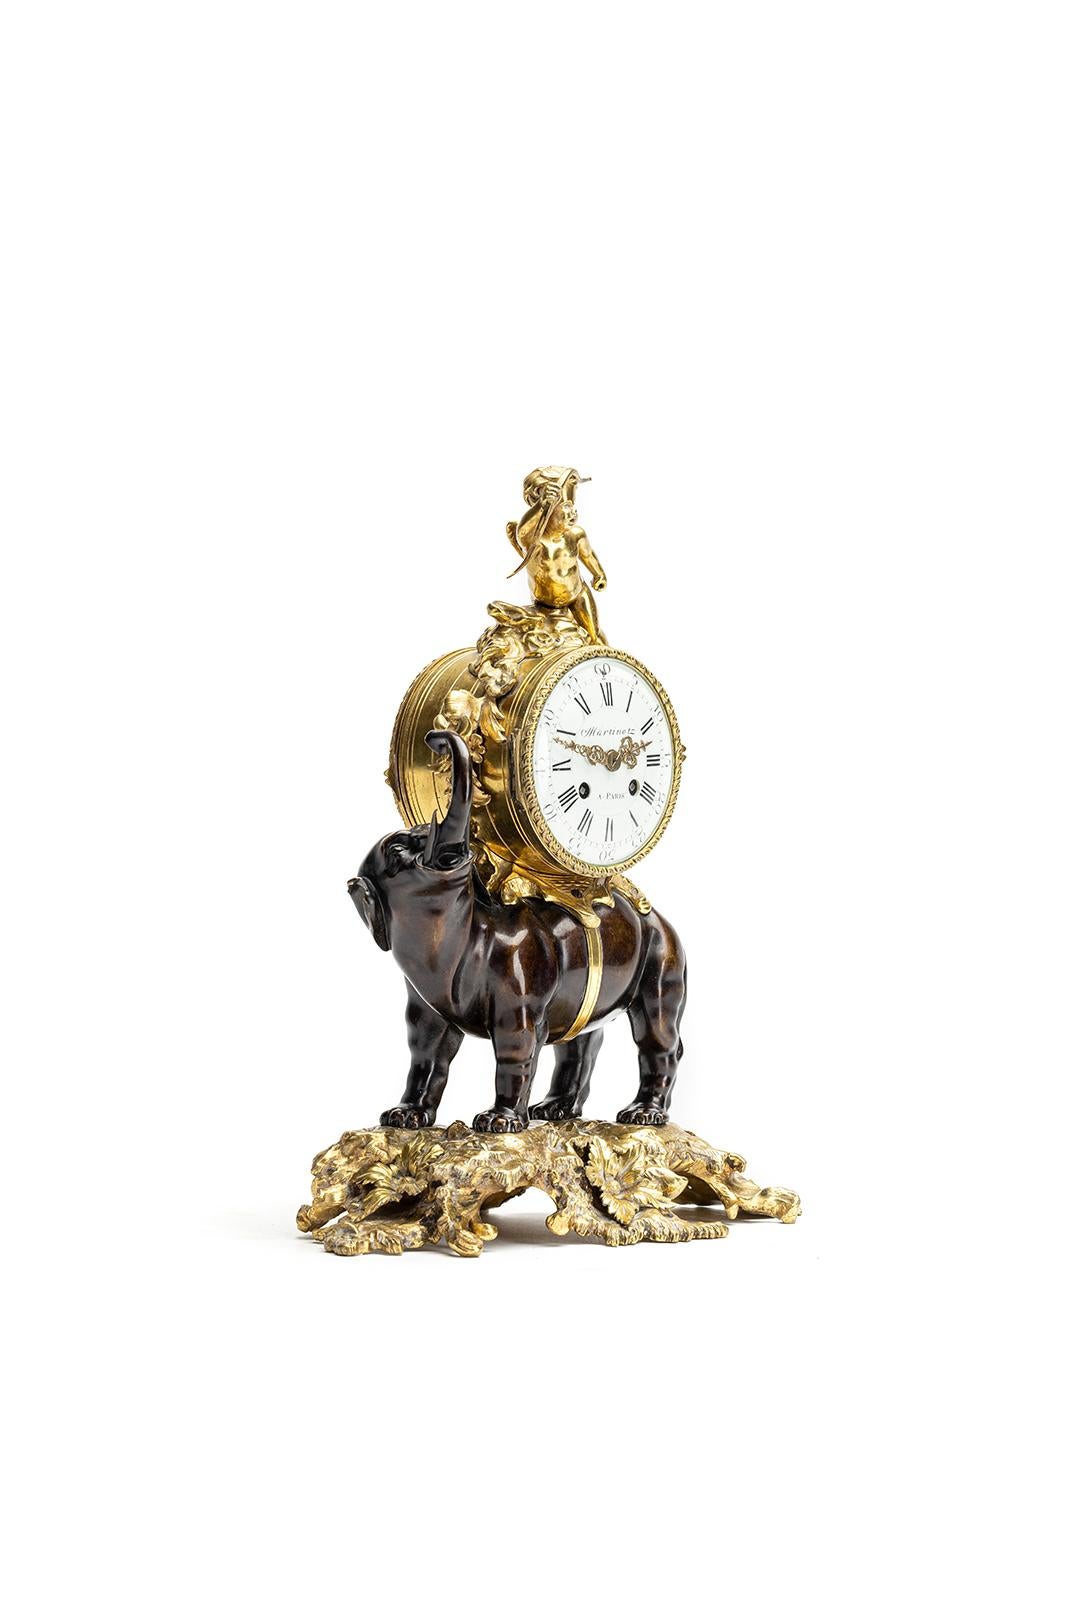 This is a very nice and highly decorative 19th-century mantel clock featuring an elephant carrying the clock on its back with its trunk facing upwards, which is considered a sign of good luck. The clock is in lovely, untouched condition and has a